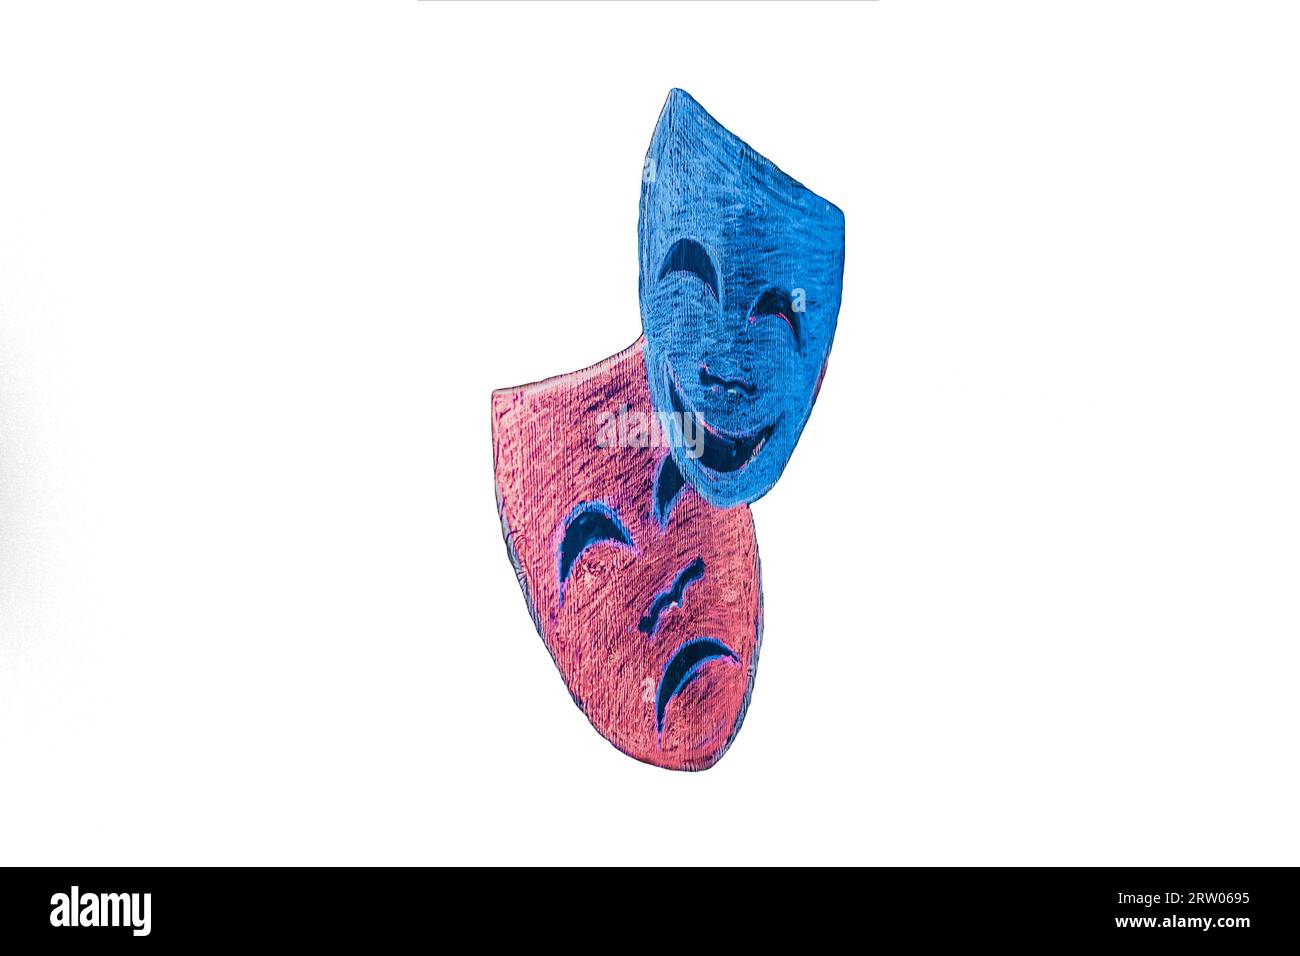 Masks show 2 colored masks sad and cheerful in the white isolated background. Stock Photo